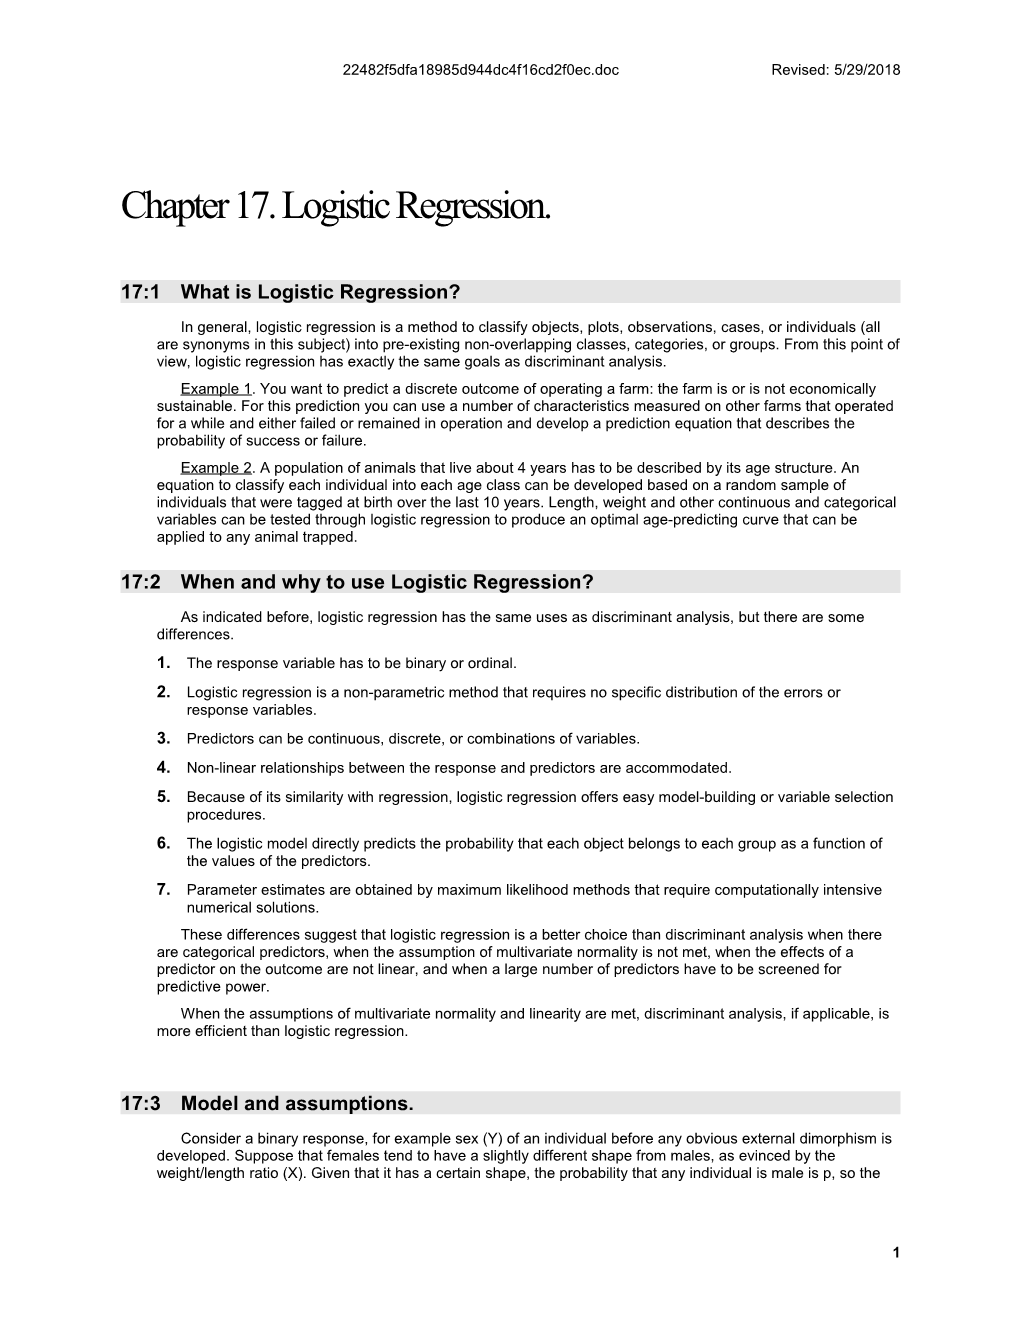 17:1 What Is Logistic Regression?